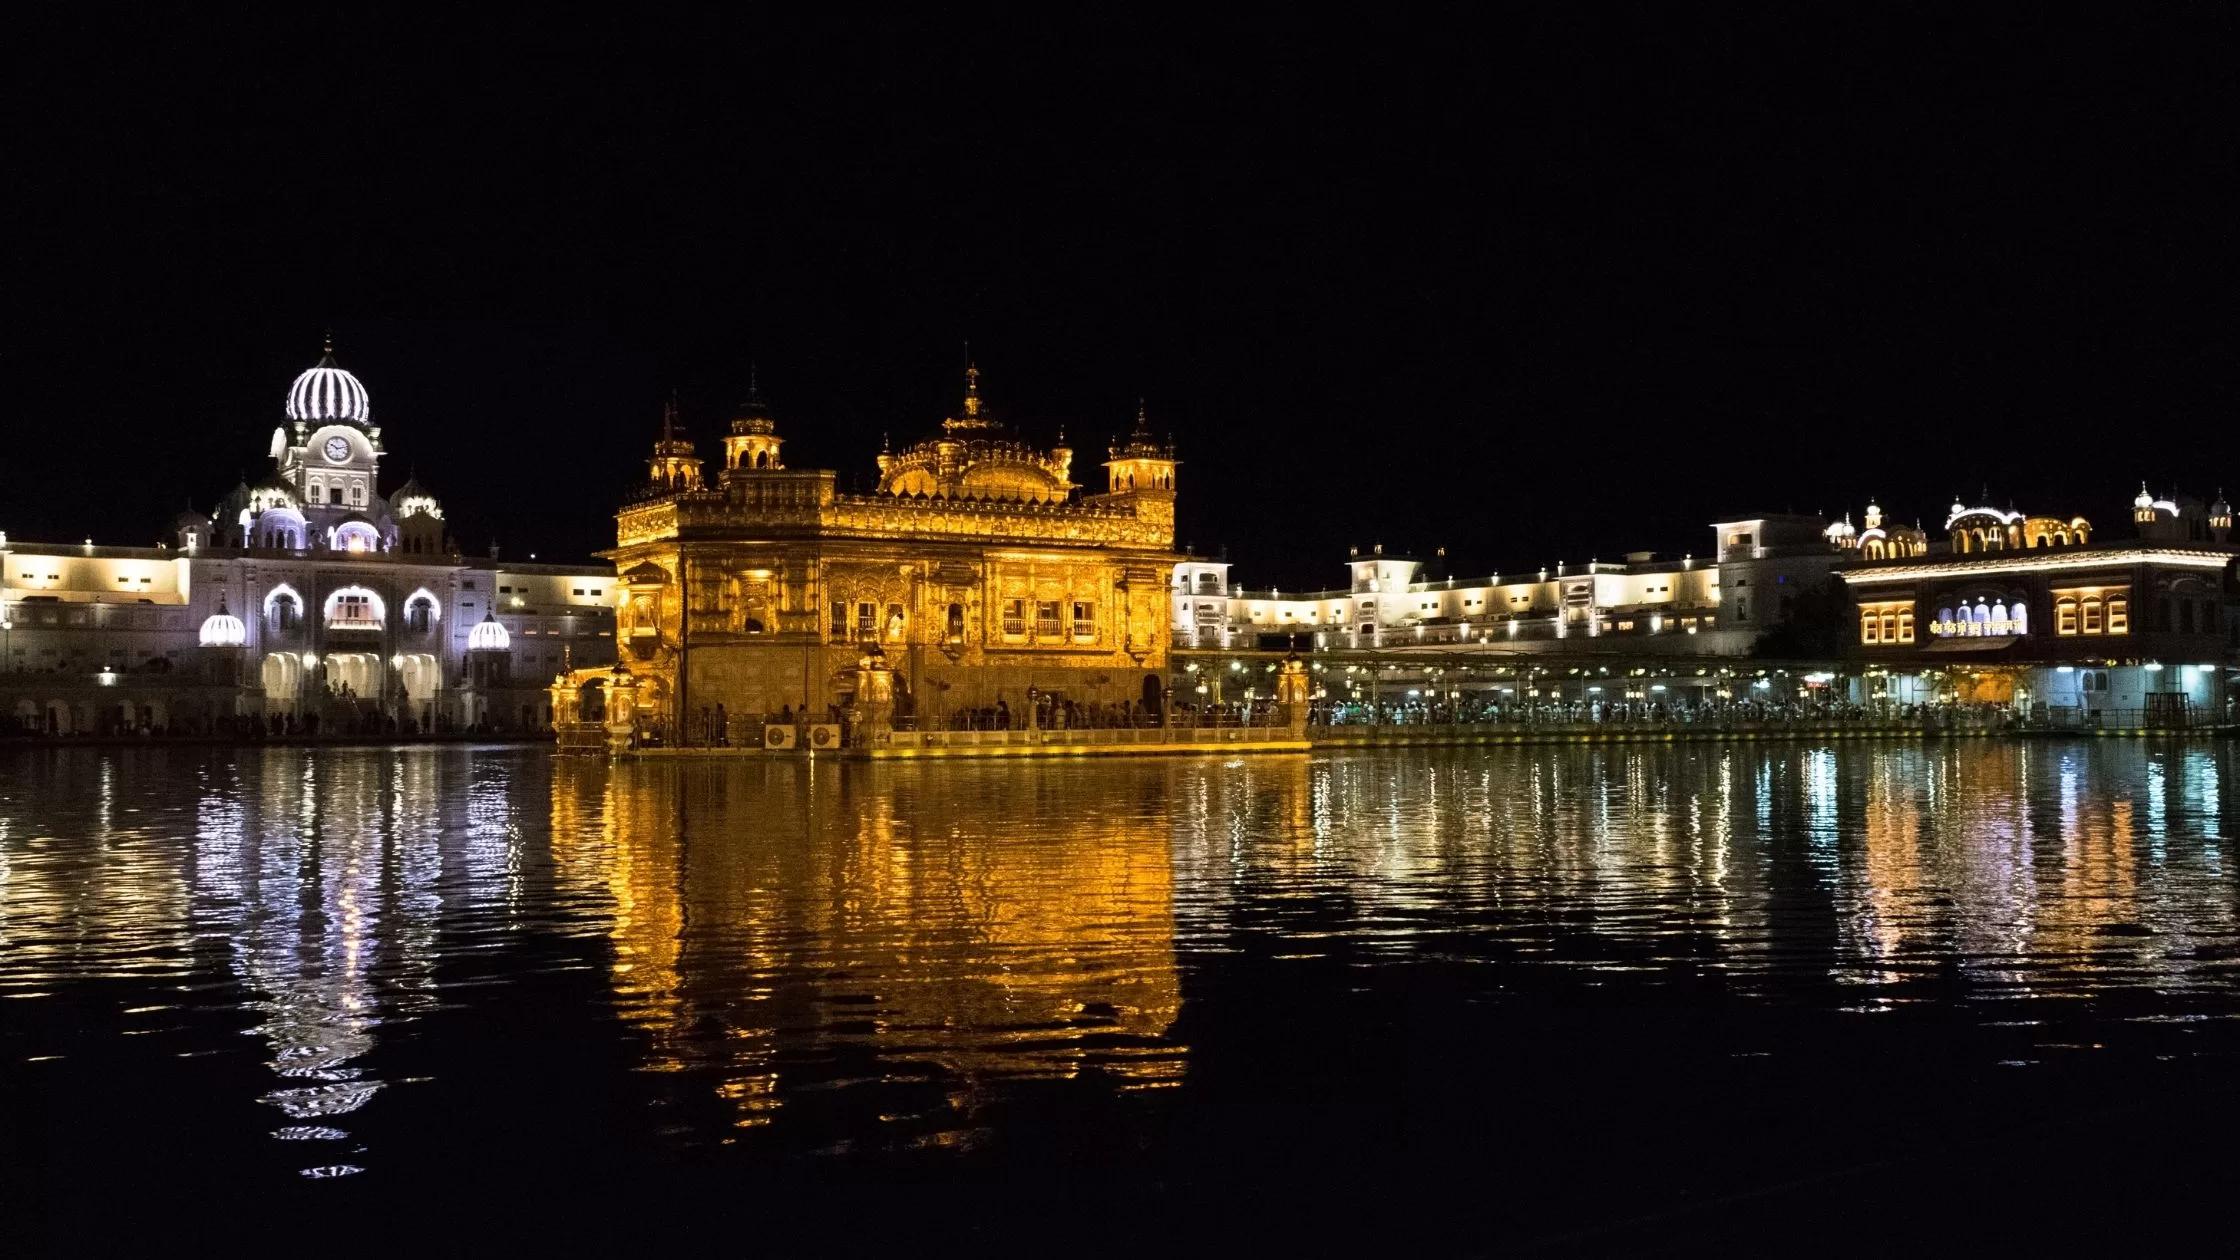 Night view of The Golden Temple in Amritsar.